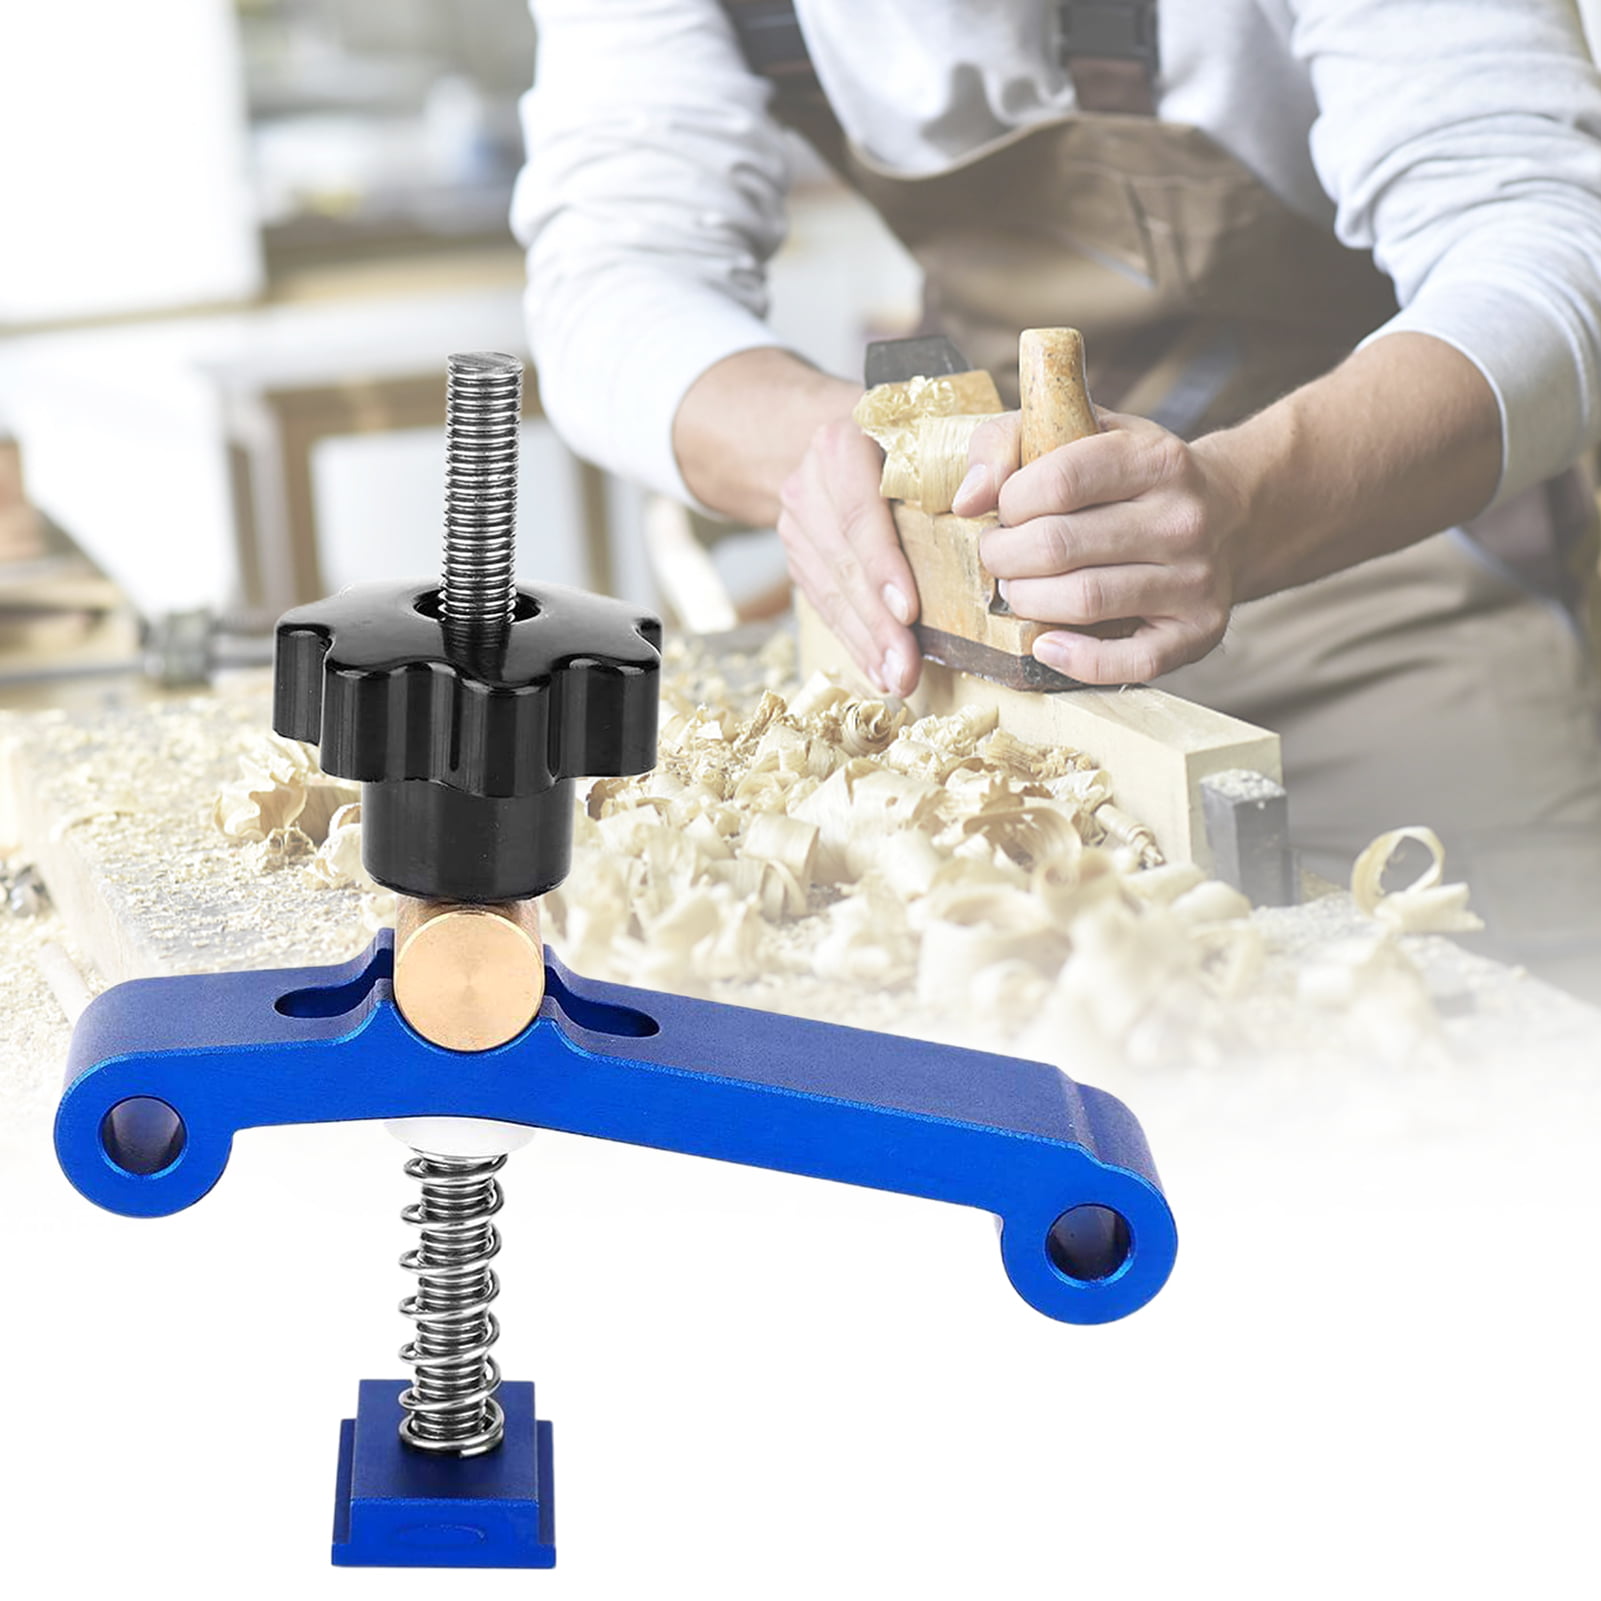 Menuiserie T Track Slider M8 T Vis M8 Nut Saw Table Acting Hold Down Clamp  For T-slot T-track Wood Work Diy Tools